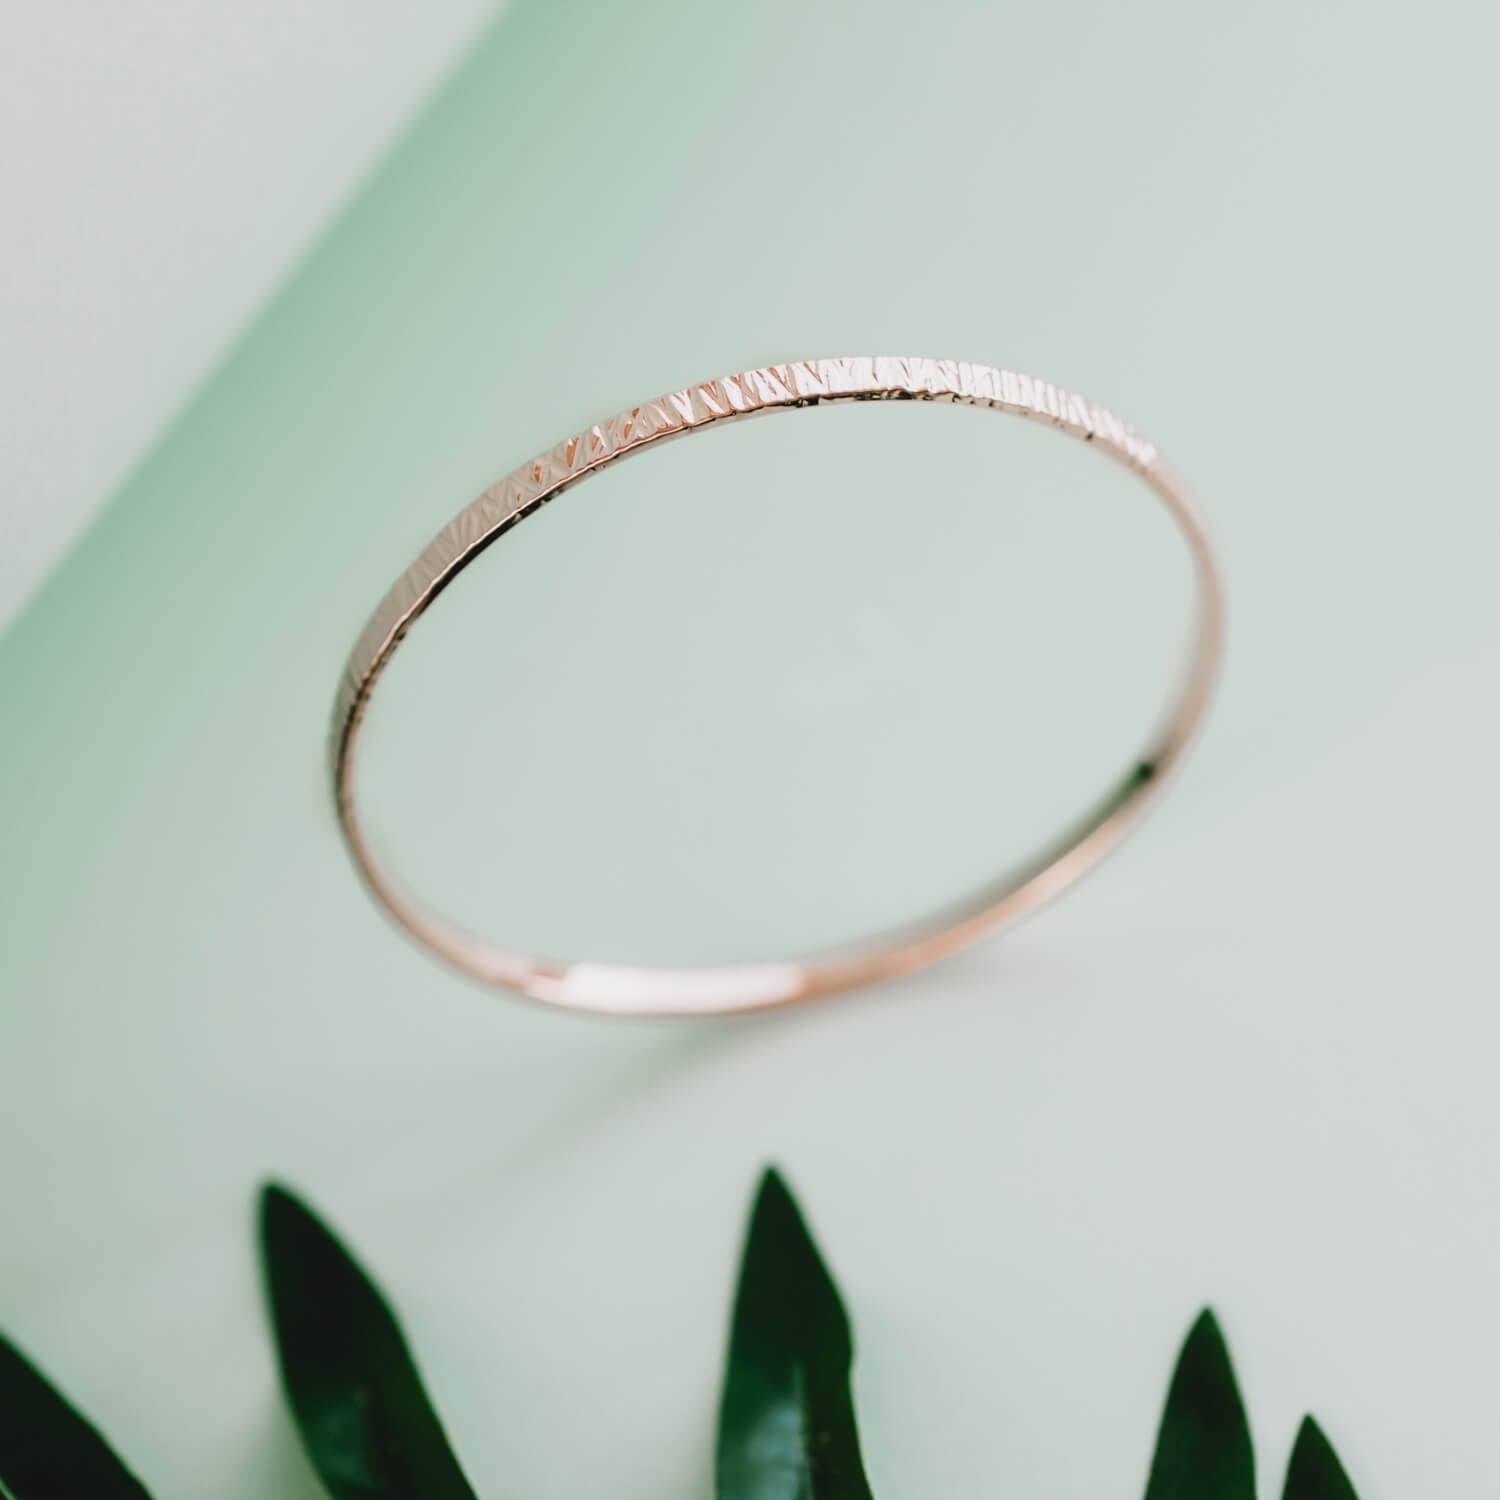 Silver bangle with a textured finish on a green background